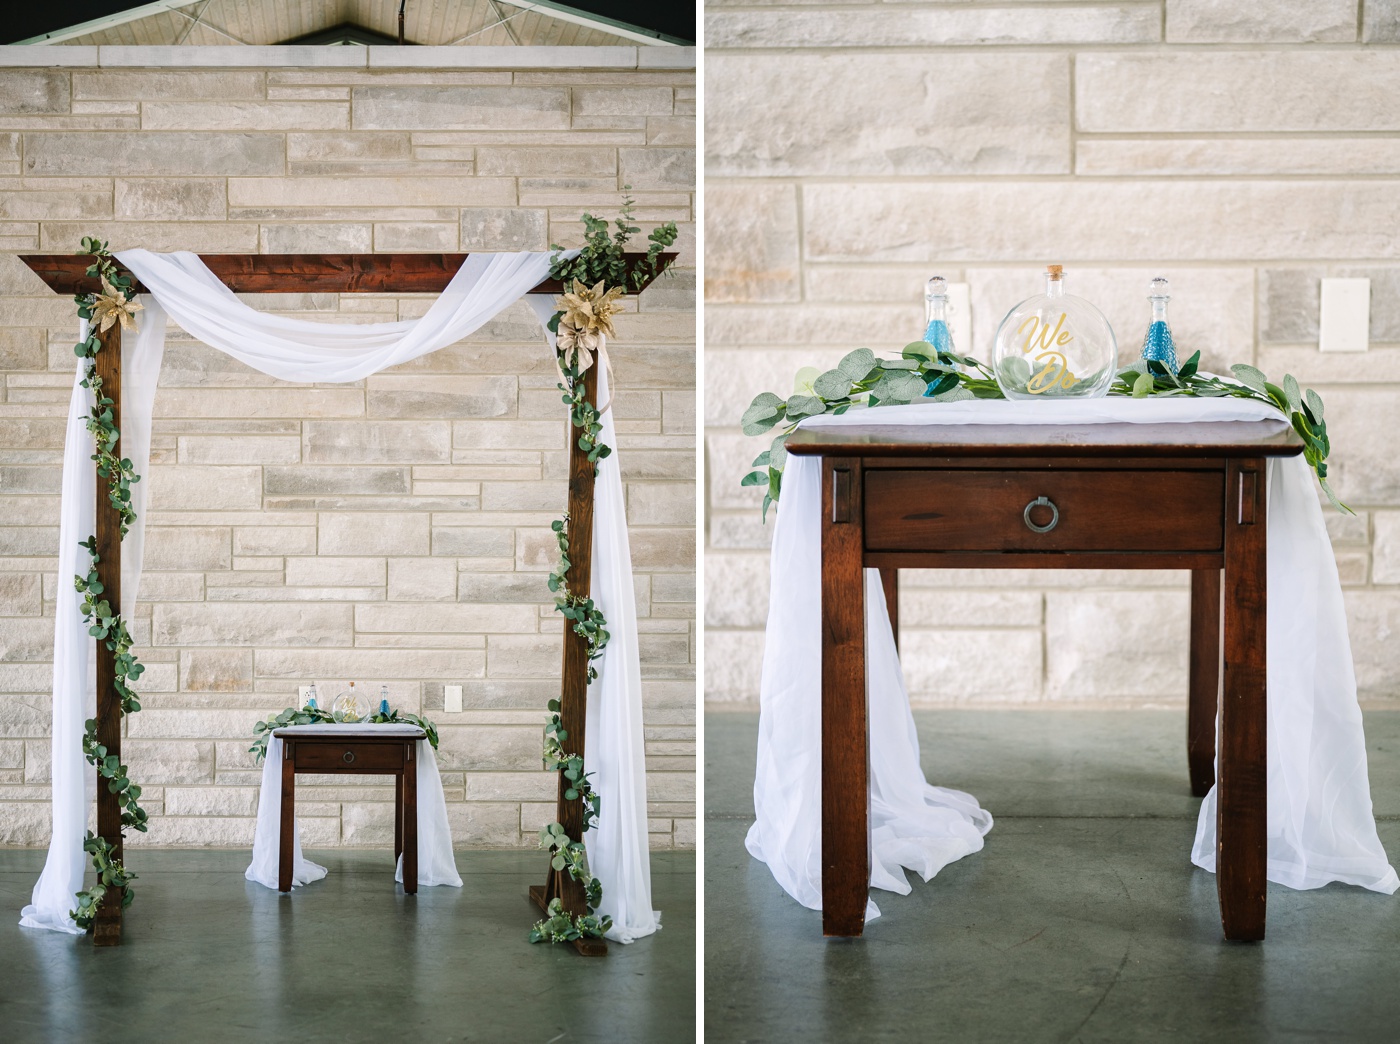 Wood wedding arch decorated with eucalyptus and white drapes